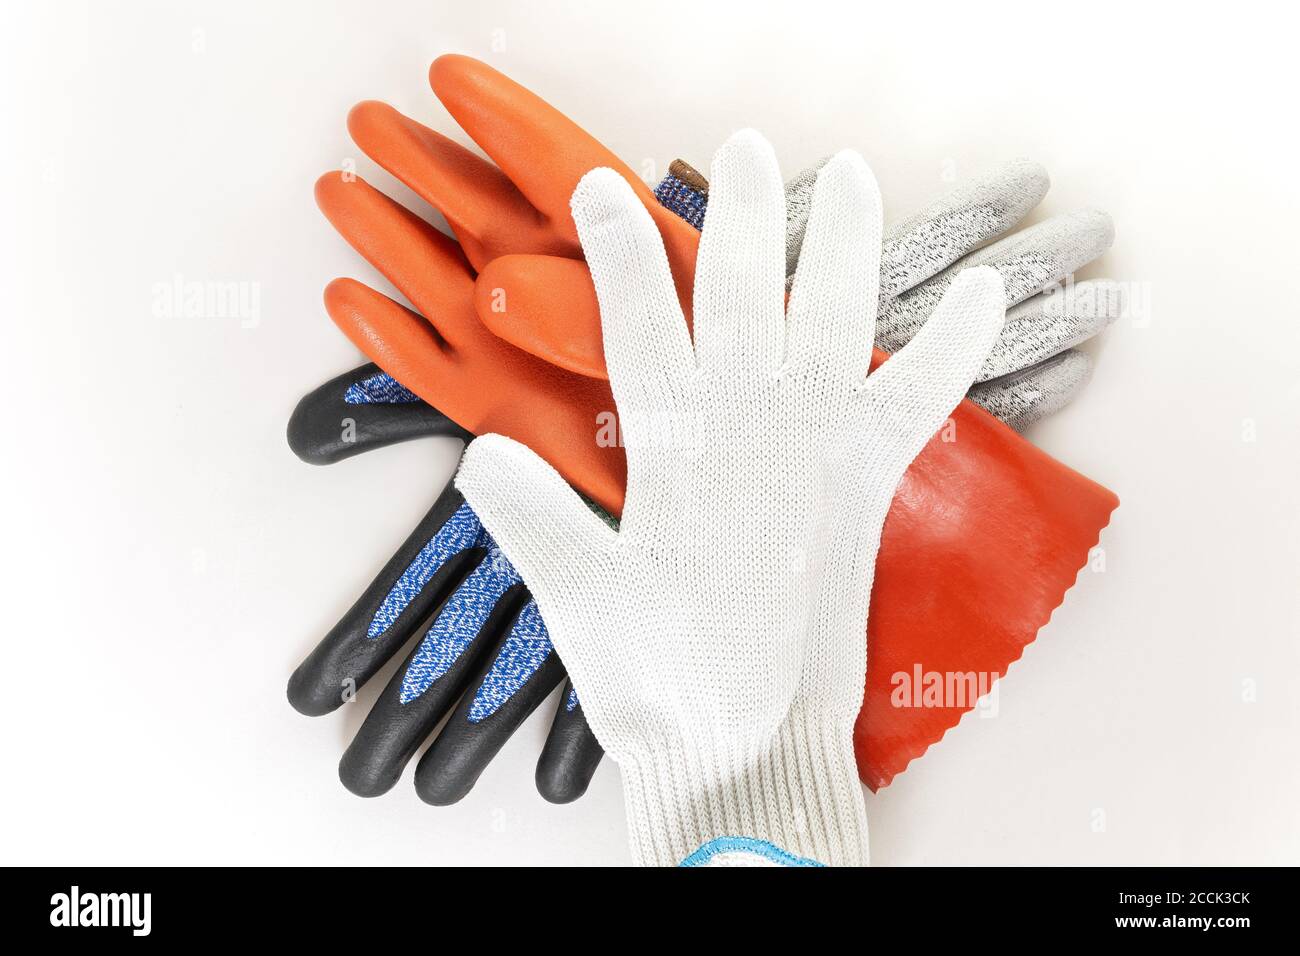 chemical resistant and cut resistant protective safety gloves in a stack against white Stock Photo